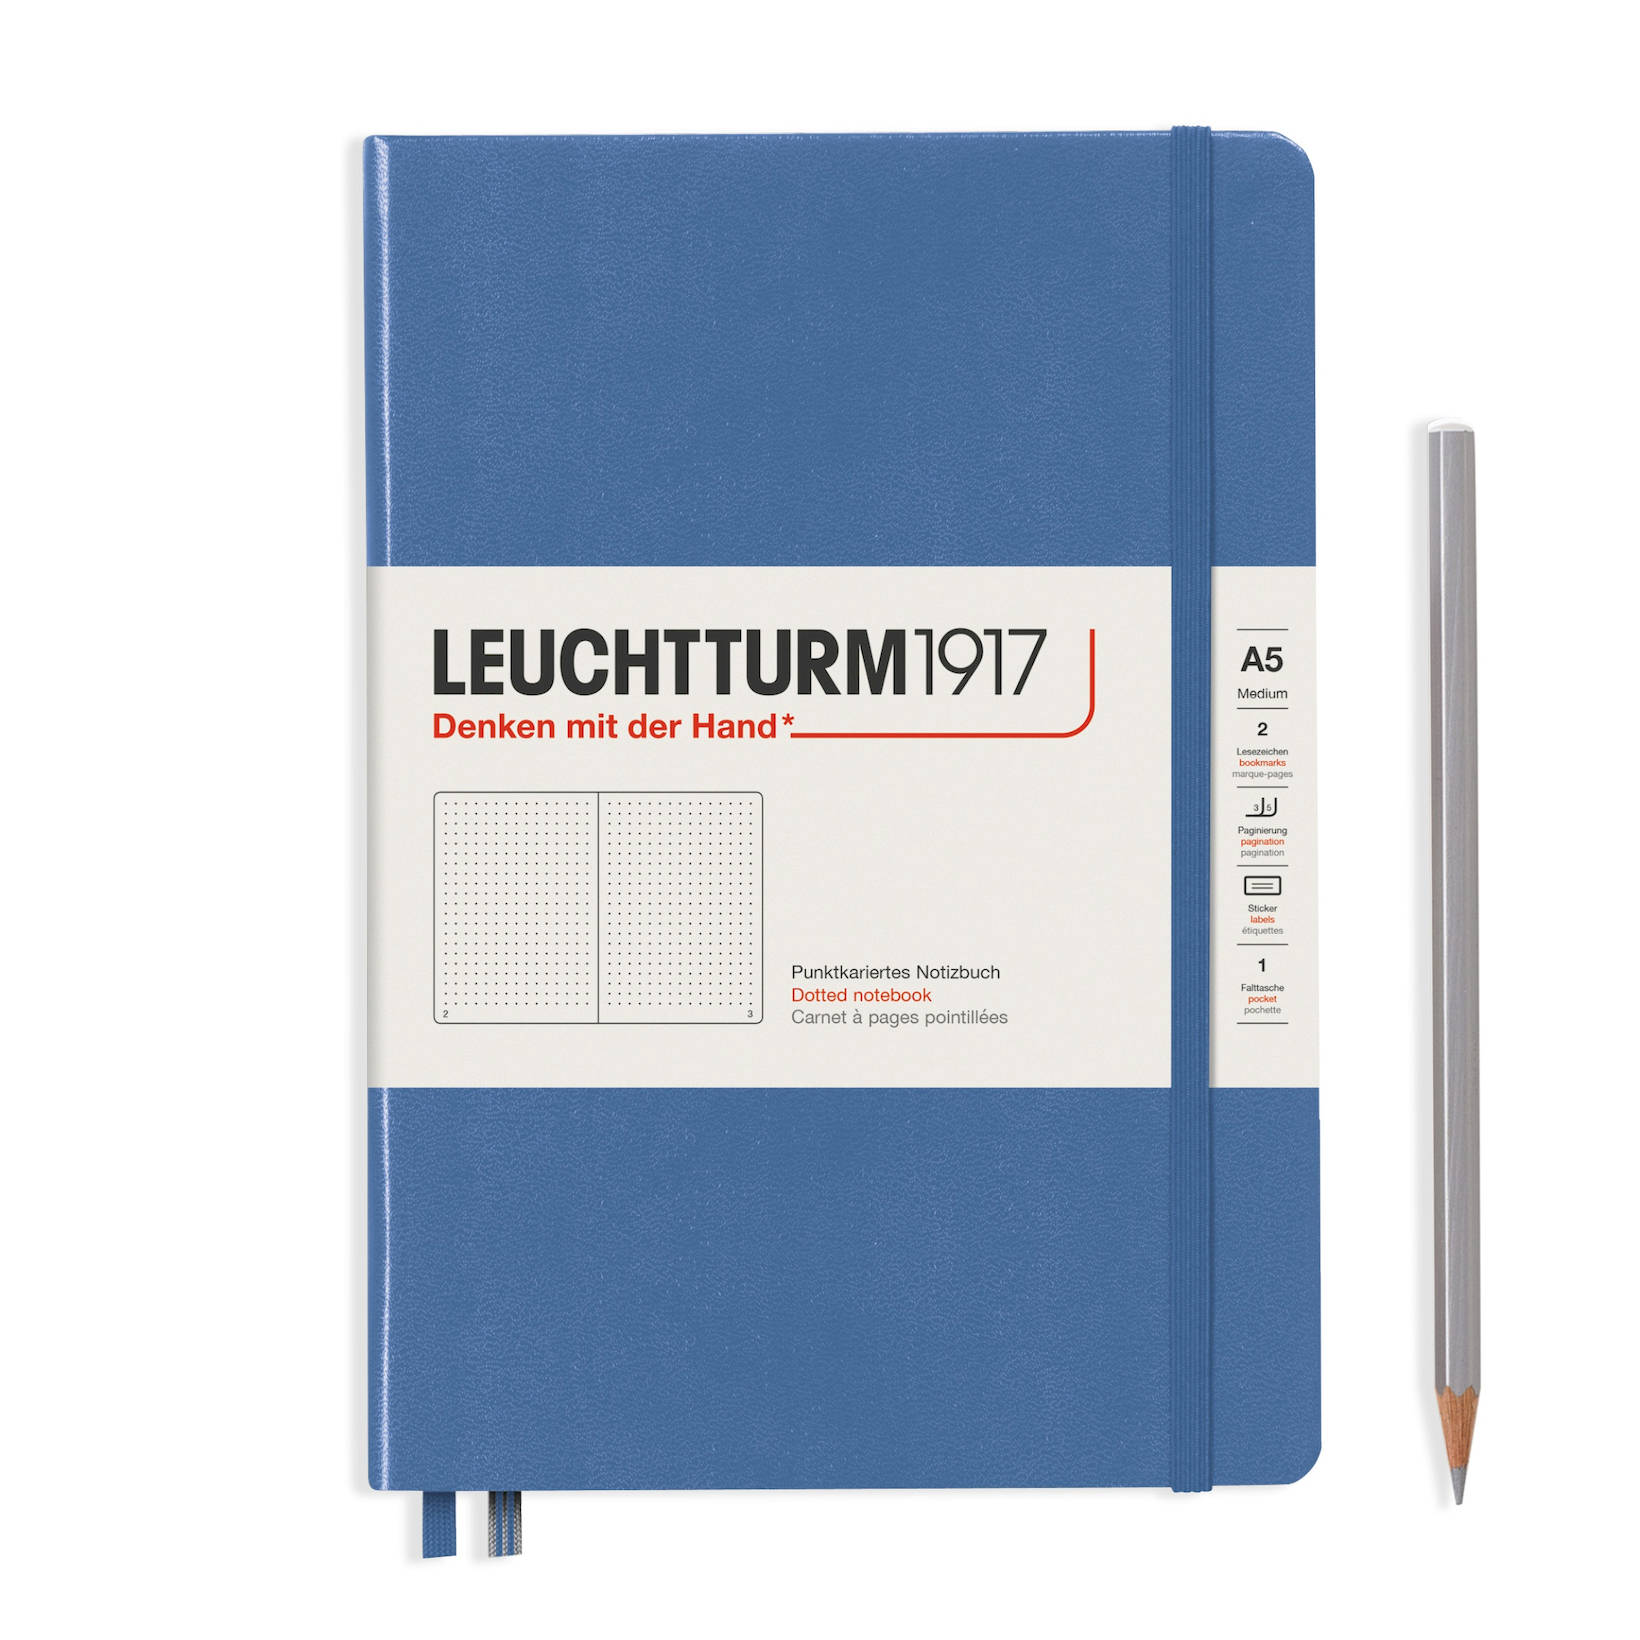 - 251 Numbered Pages Stone Blue LEUCHTTURM1917 Rising Colors Special Edition Medium A5 Dotted Hardcover Notebook